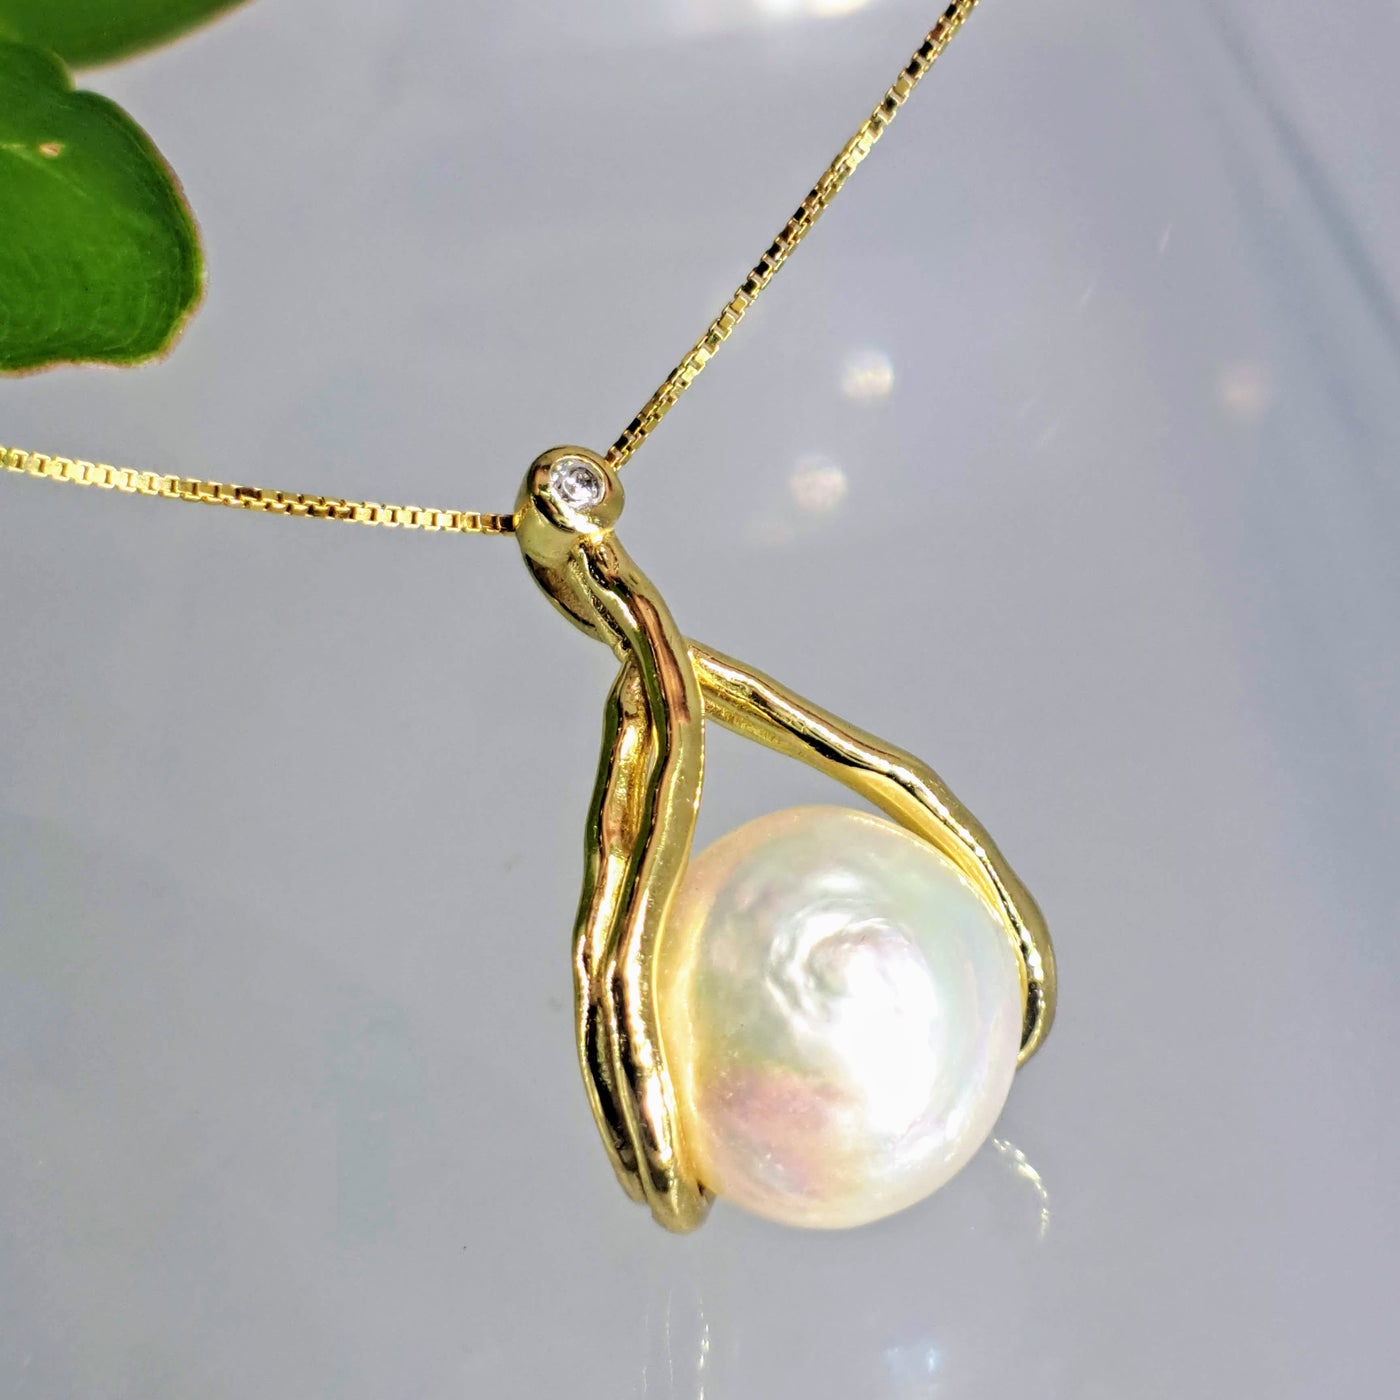 "Beholding Beauty" 1" Pendant On 16" Necklace - Baroque Pearl & Topaz